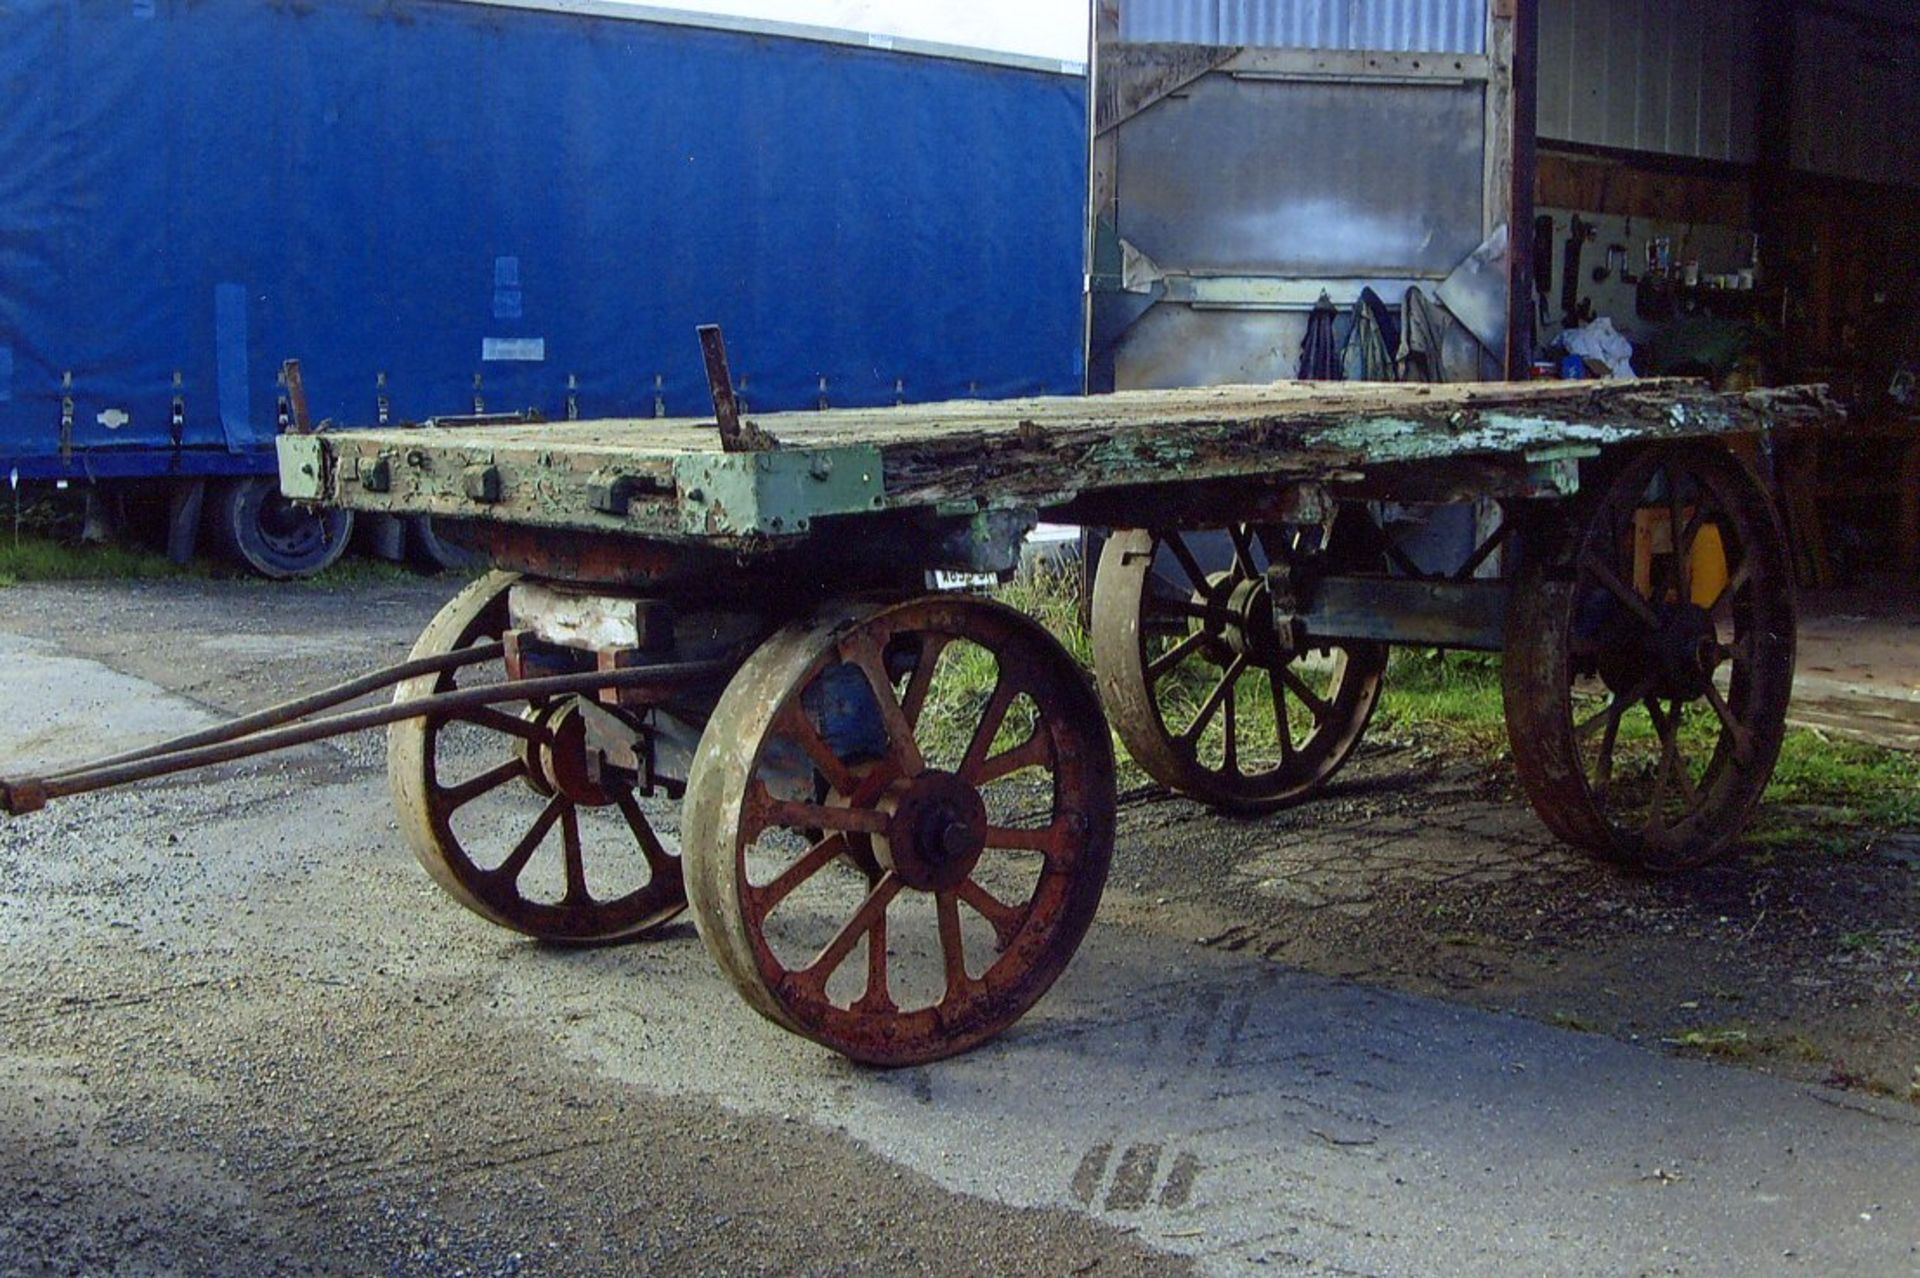 Circa 1900 Aveling & Porter traction wagon. In derelict condition this flatbed trailer is lacking